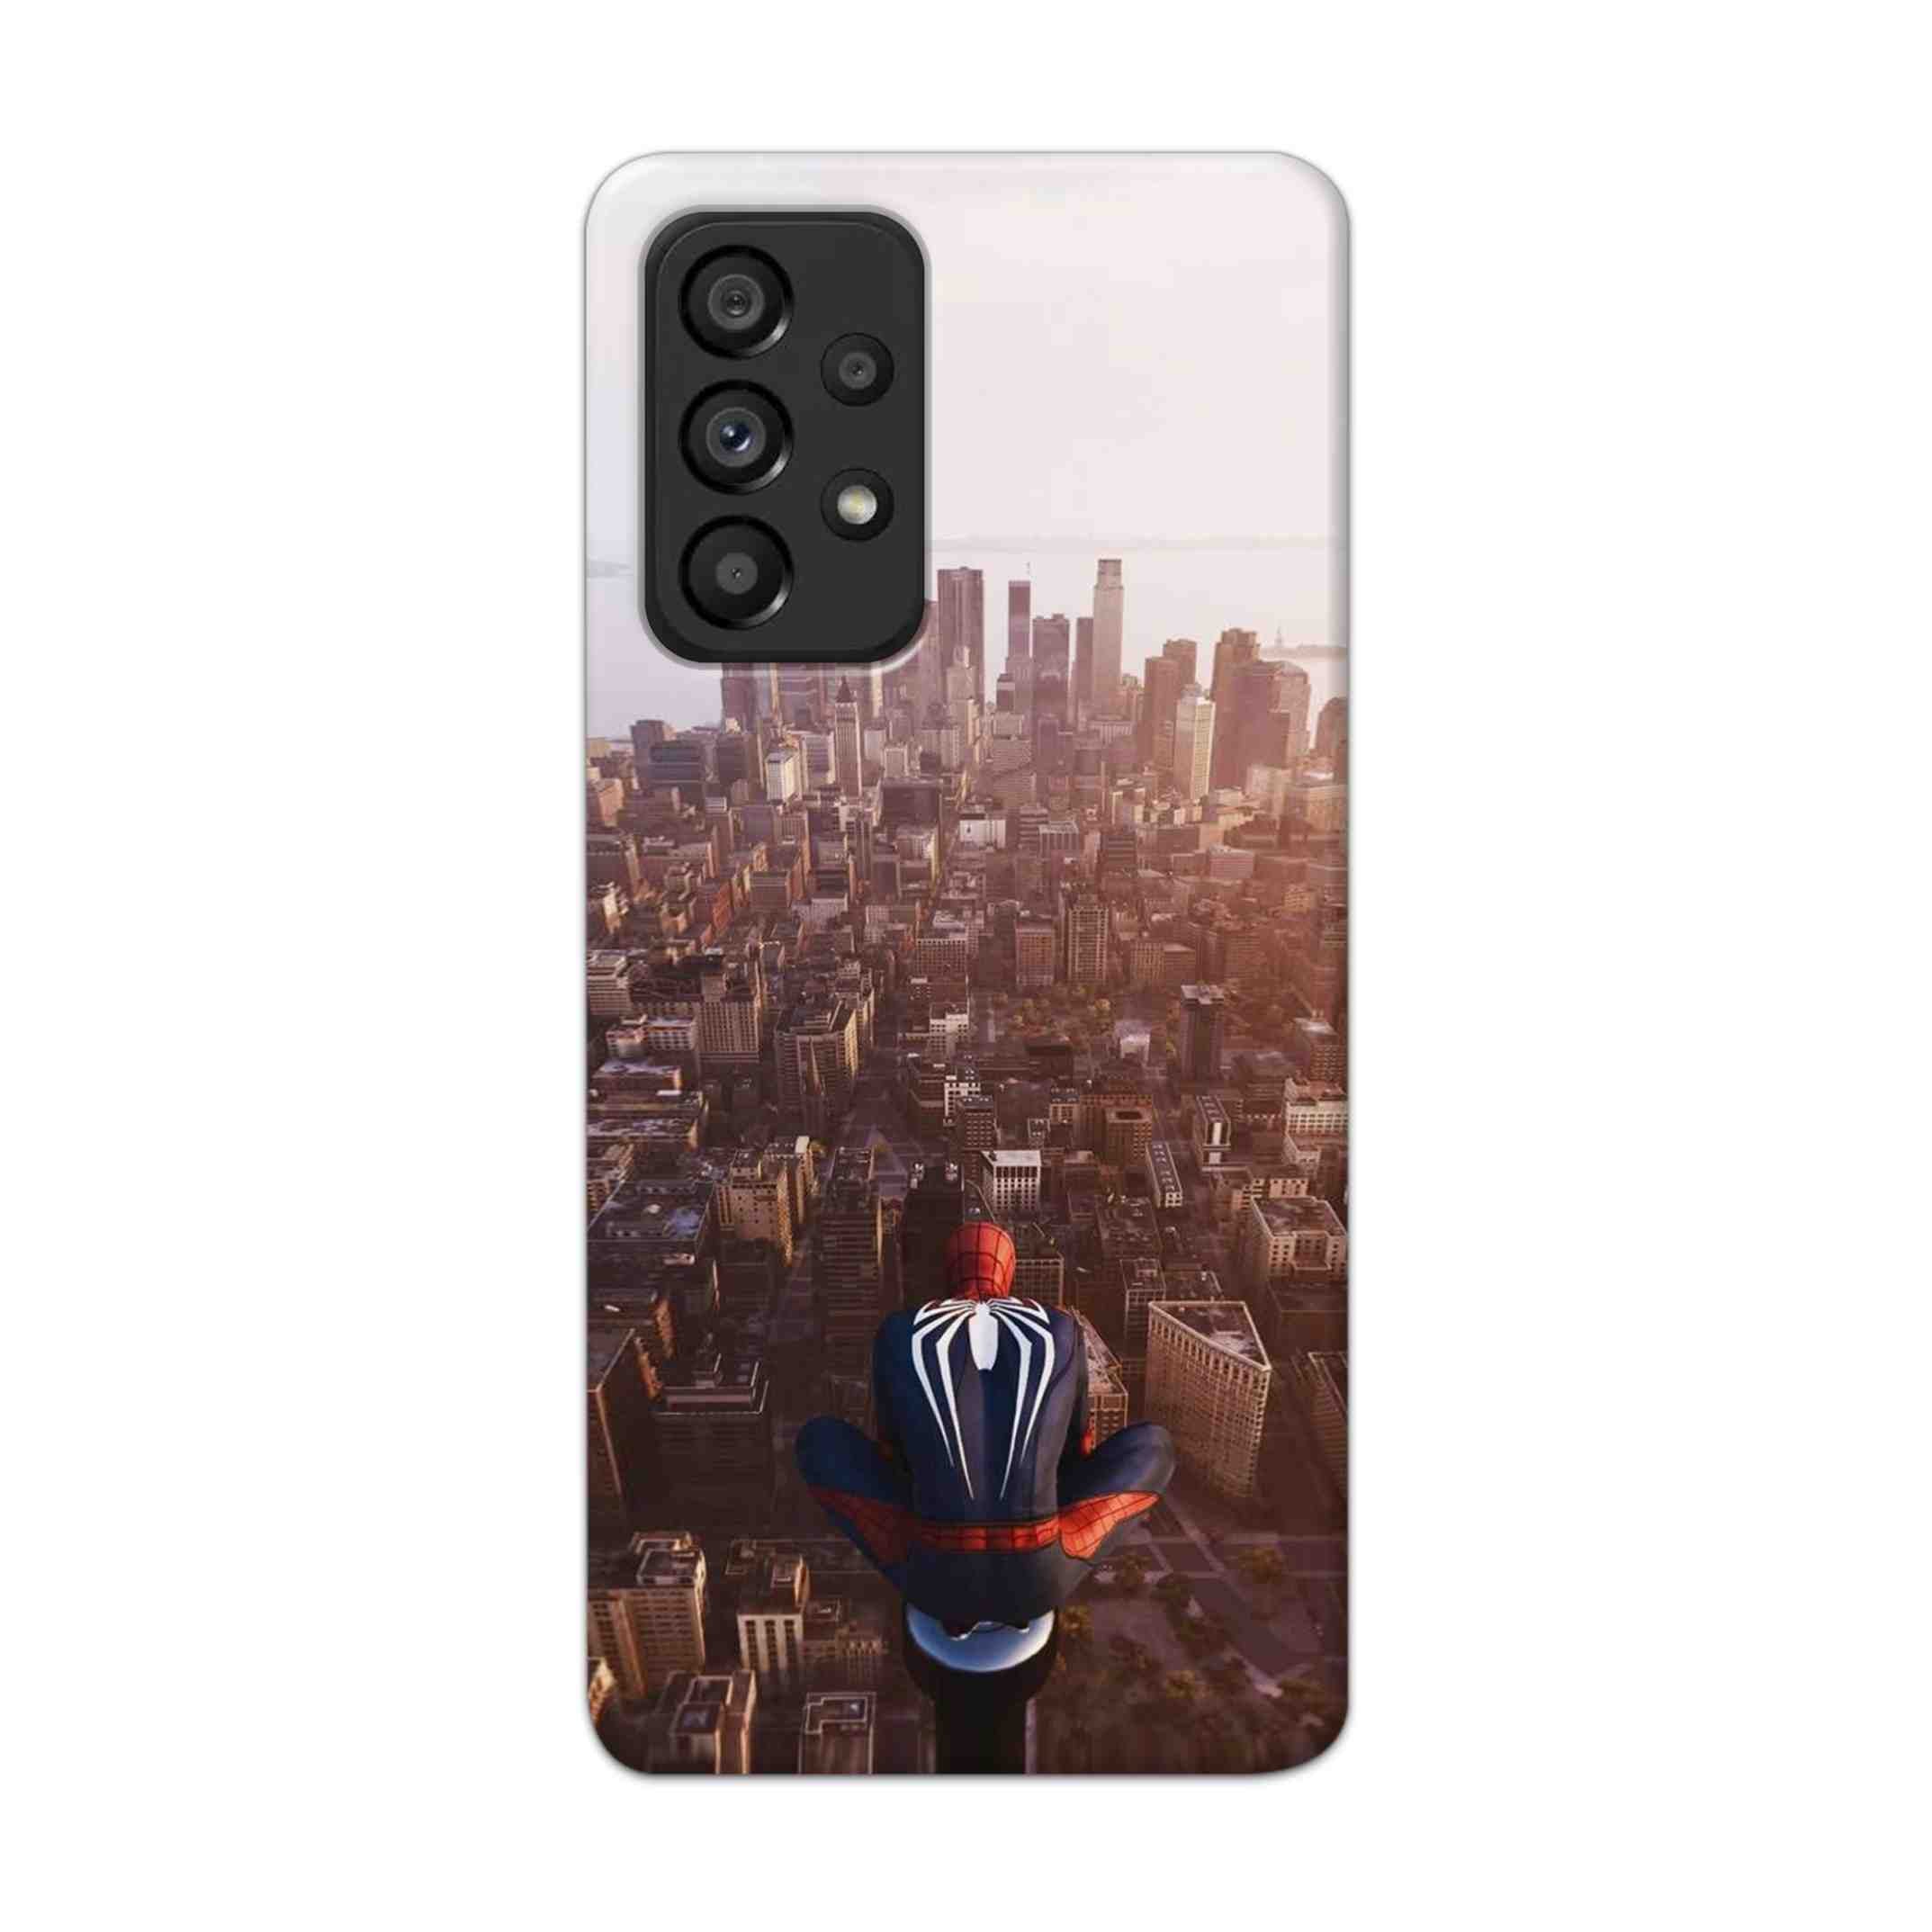 Buy City Of Spiderman Hard Back Mobile Phone Case Cover For Samsung Galaxy A53 5G Online